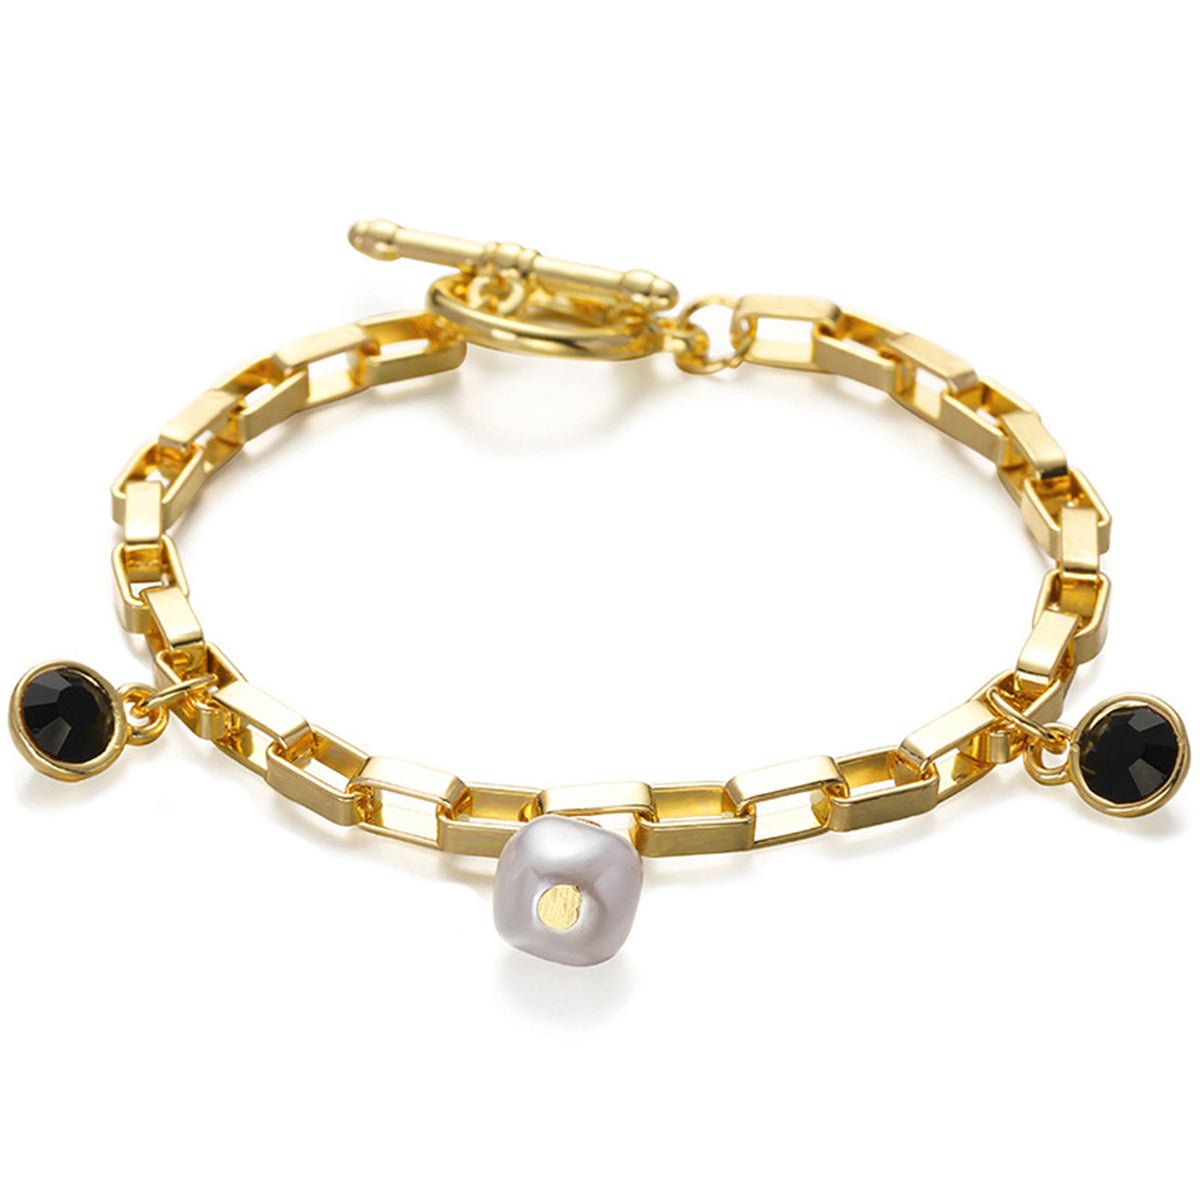 Pearl & Cubic Zirconia 18K Gold-Plated Charm Bracelet